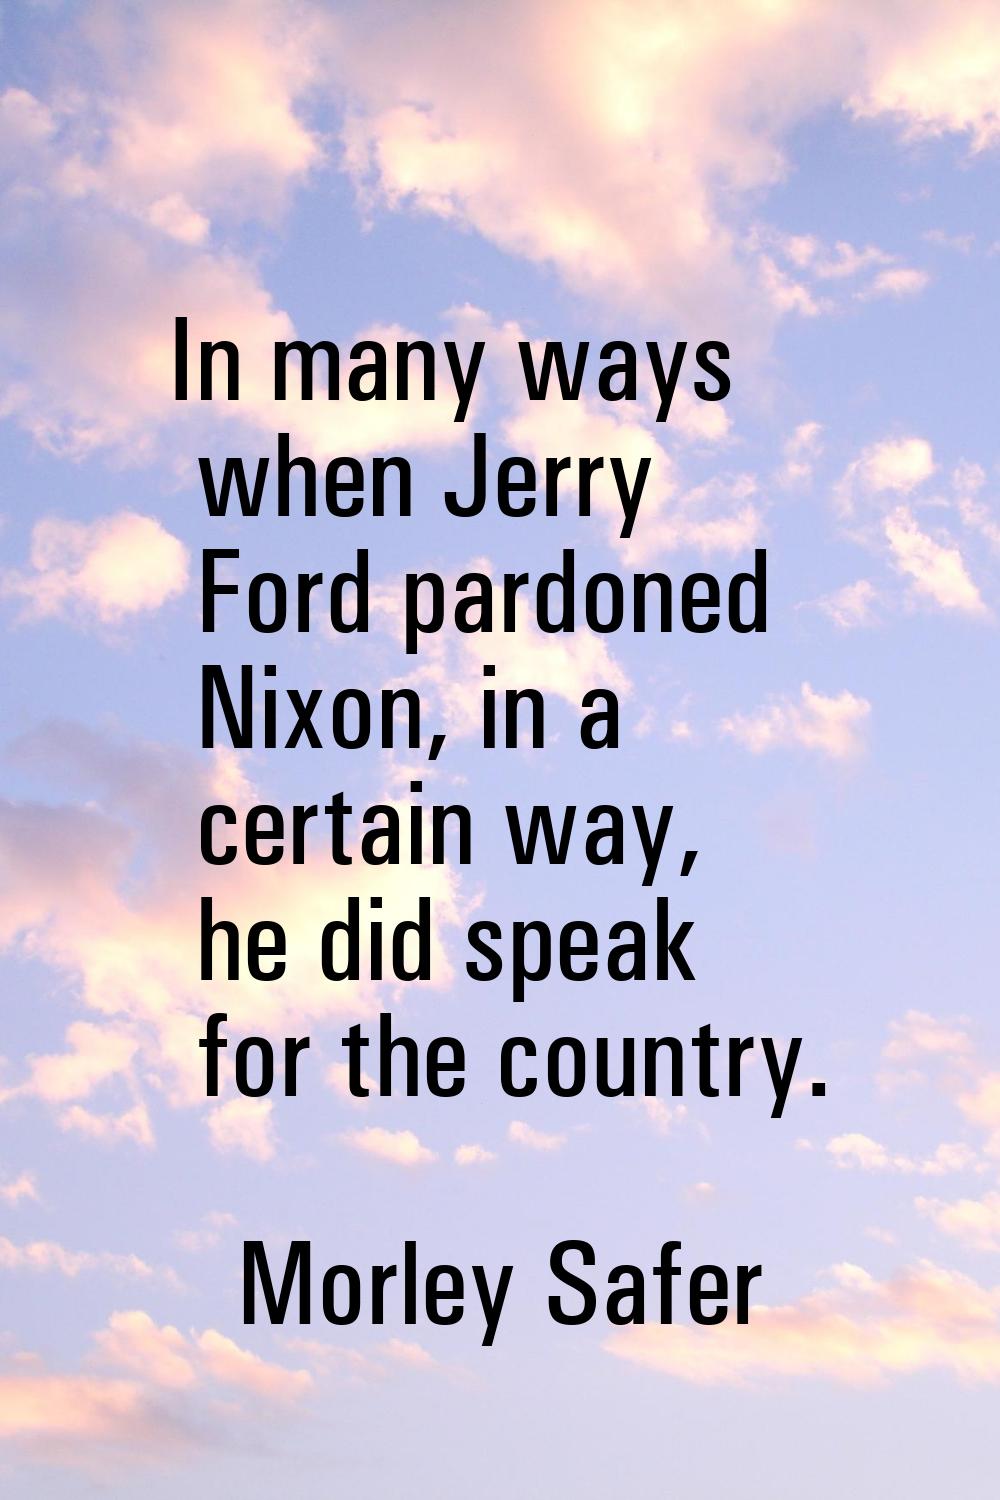 In many ways when Jerry Ford pardoned Nixon, in a certain way, he did speak for the country.